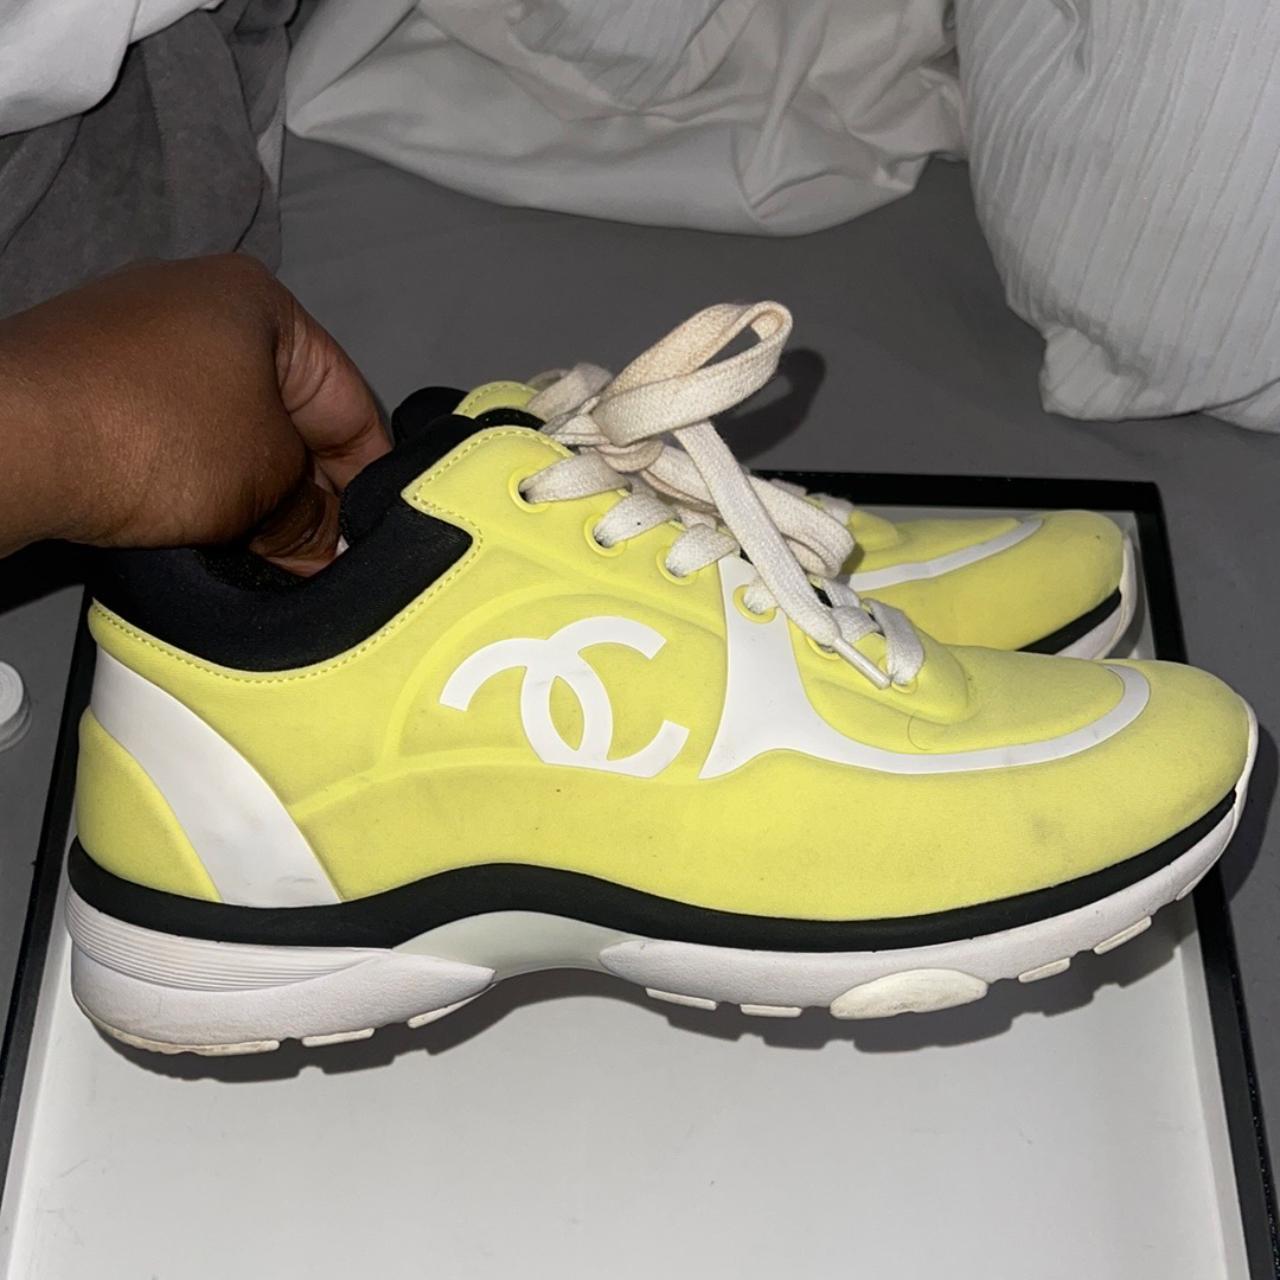 Authentic Chanel sneakers - Depop